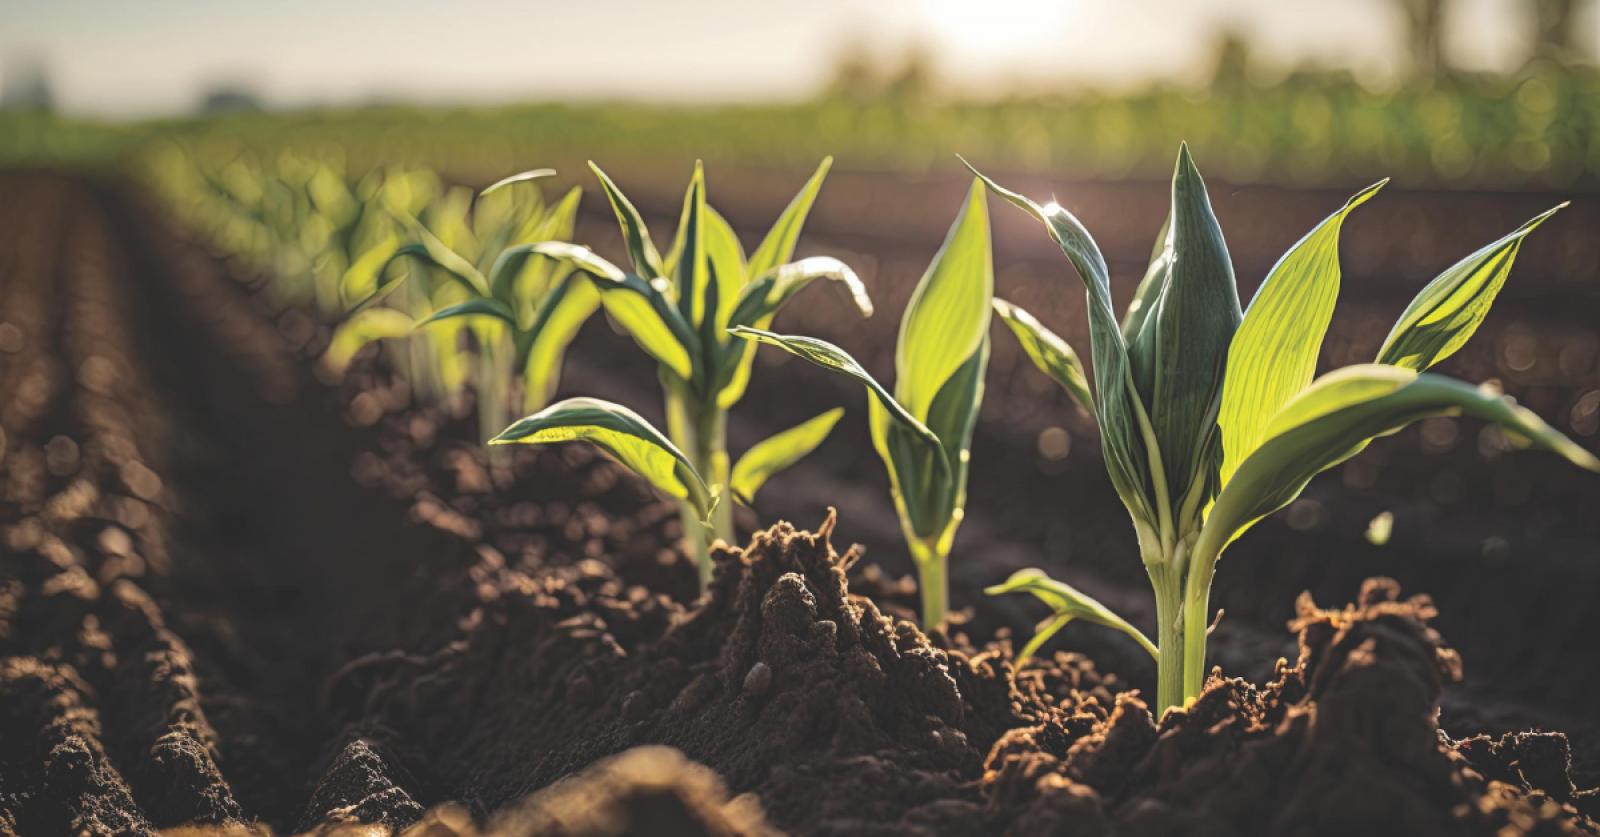 Government of Canada becomes a founding member of the efficient fertilizer consortium